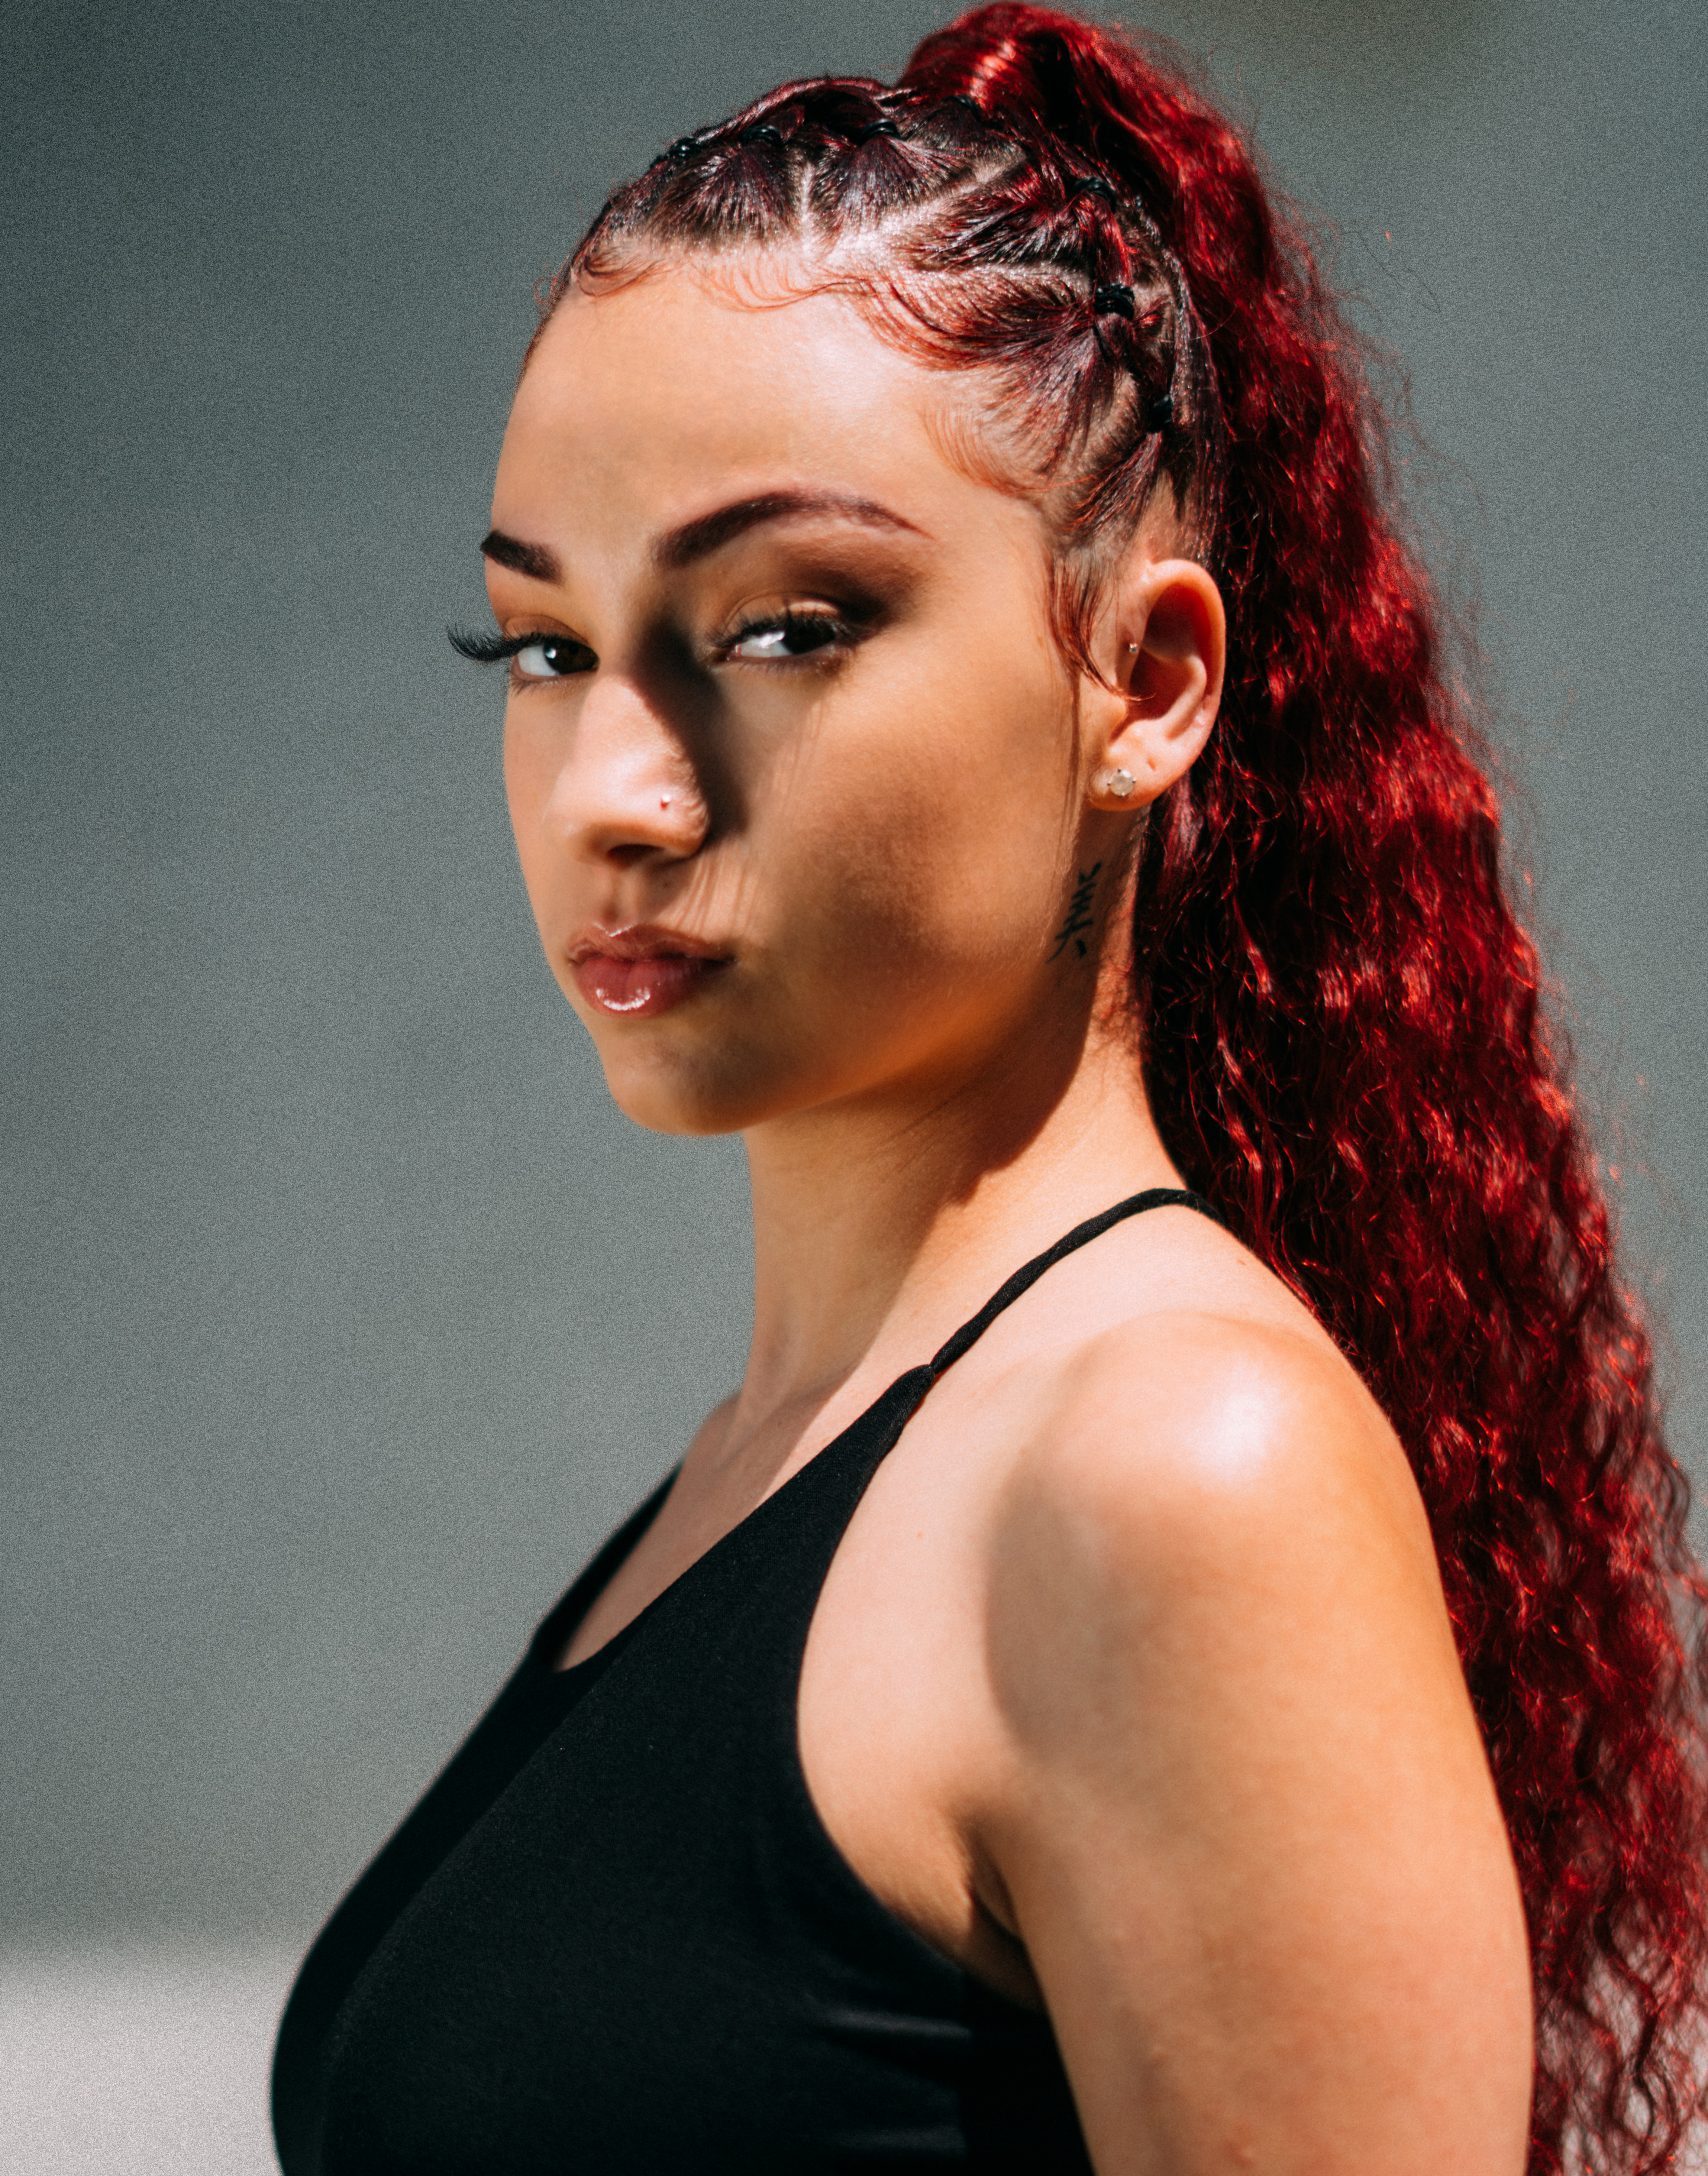 Bahd bhabie only fans